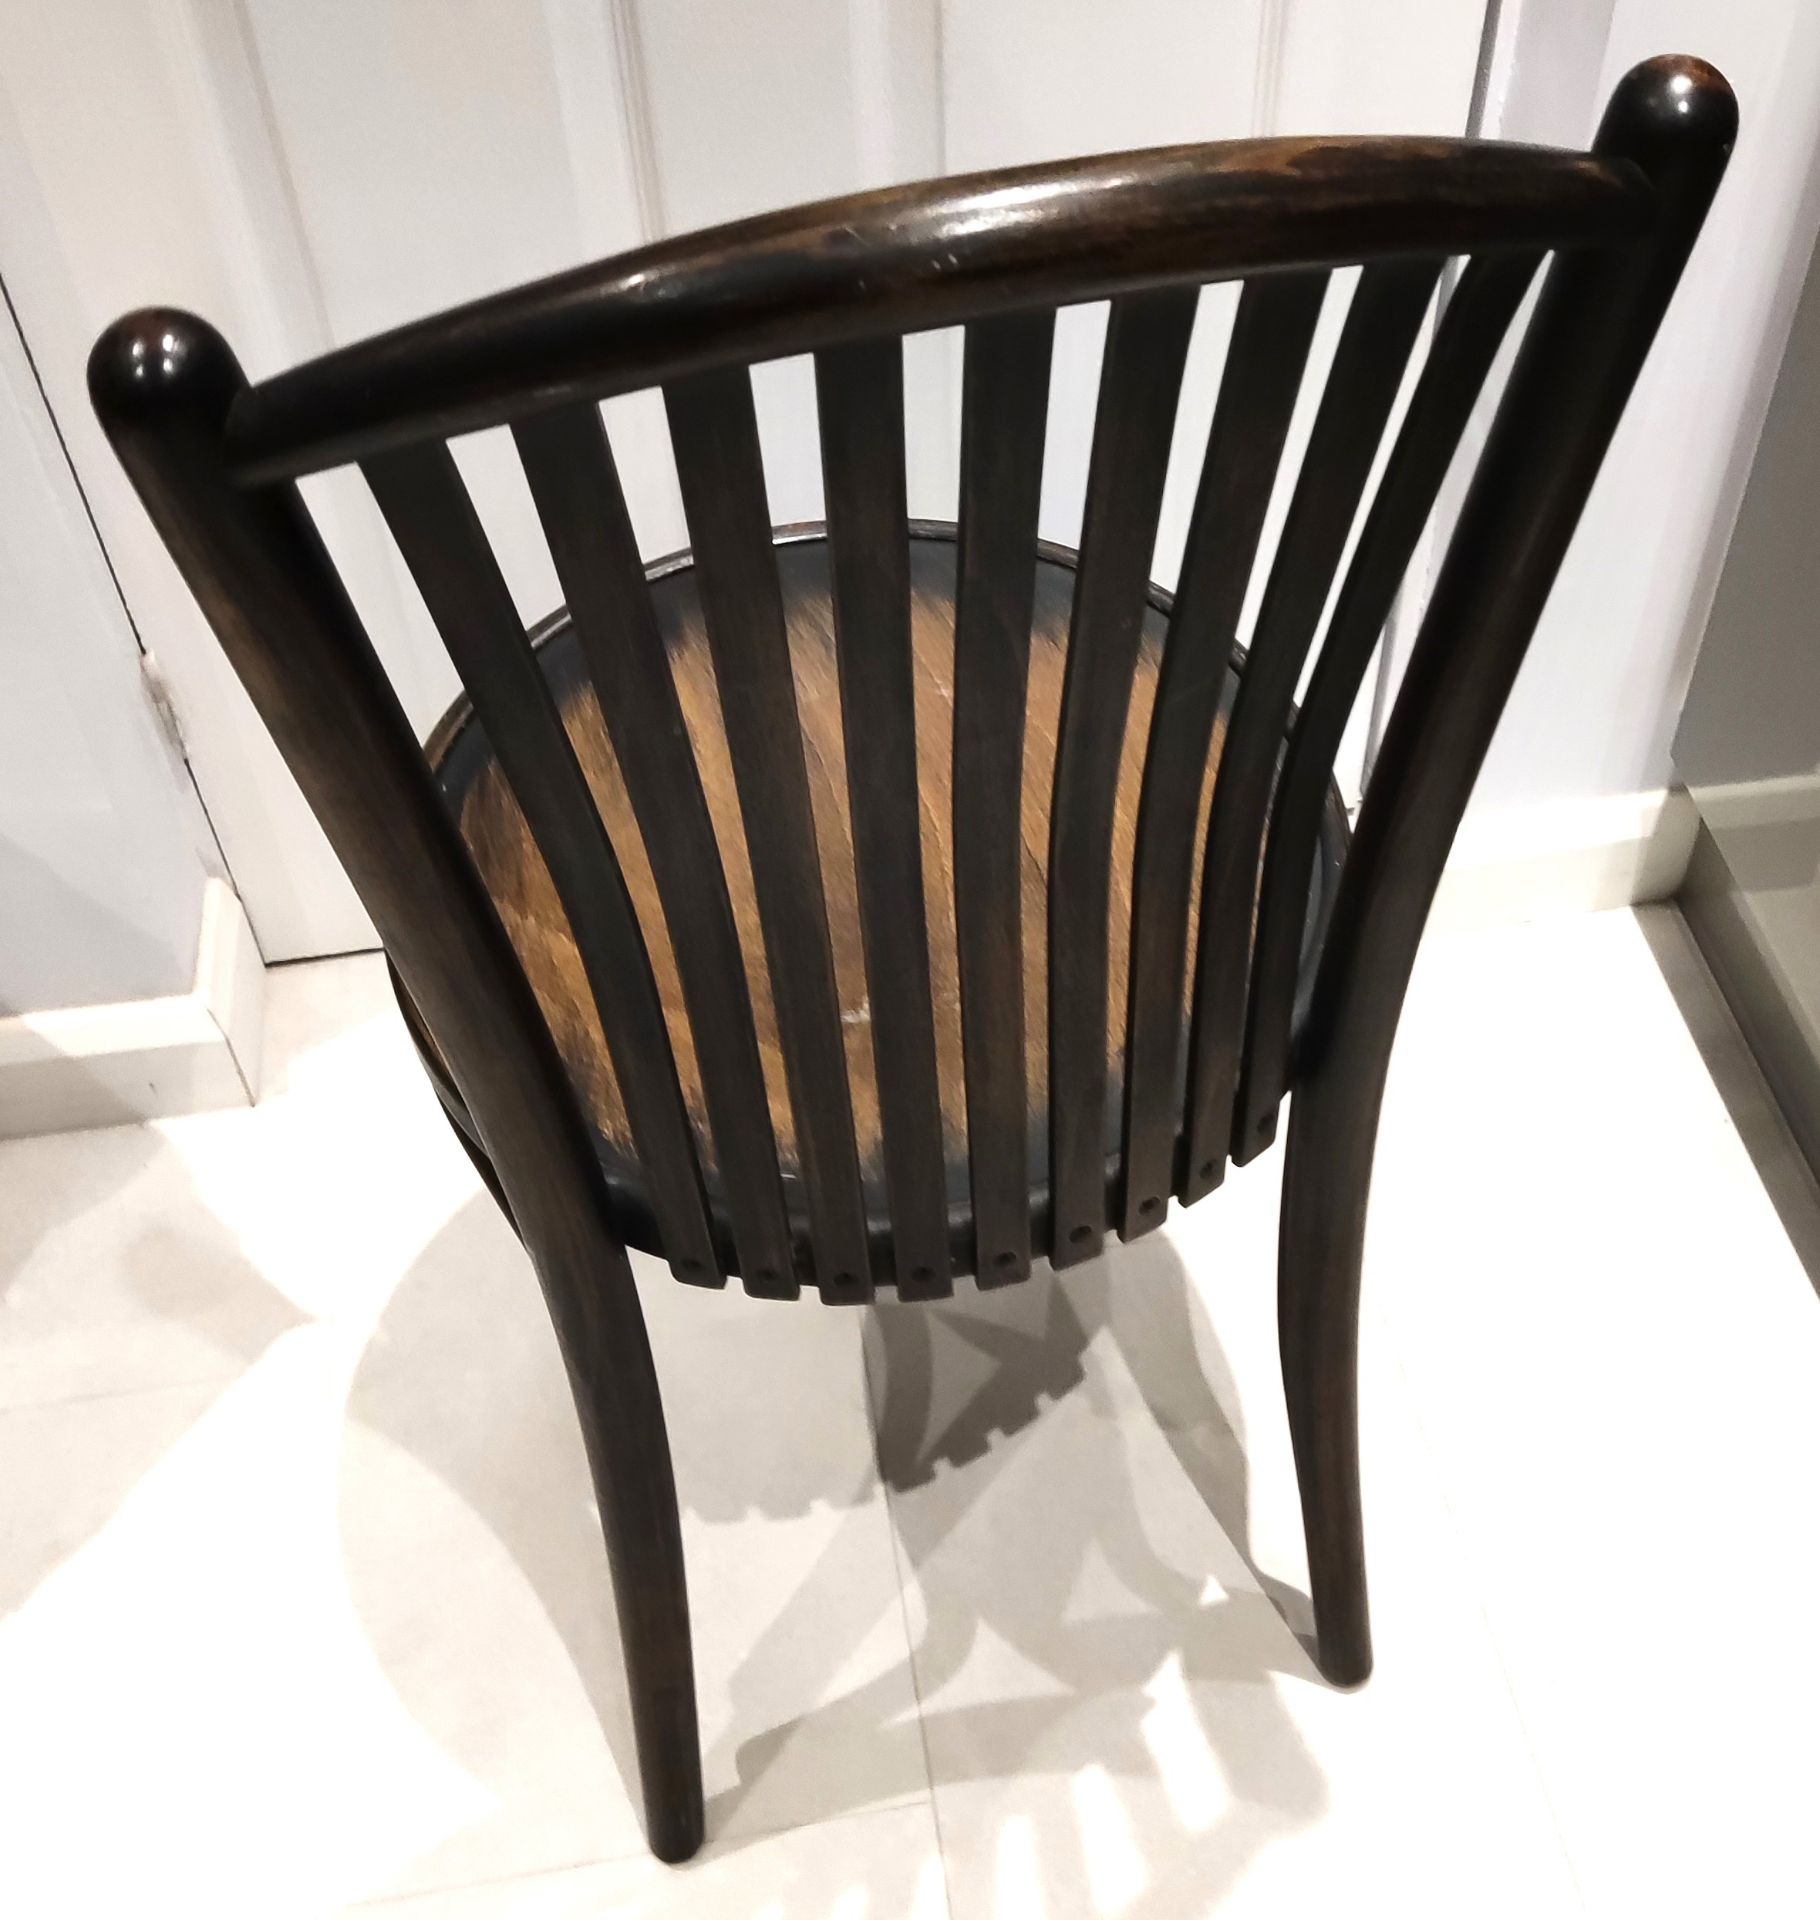 1 x Vintage Dark Wood Bentwood Chair - CL444 - NO VAT ON THE HAMMER - Location: Altrincham WA14 This - Image 11 of 15